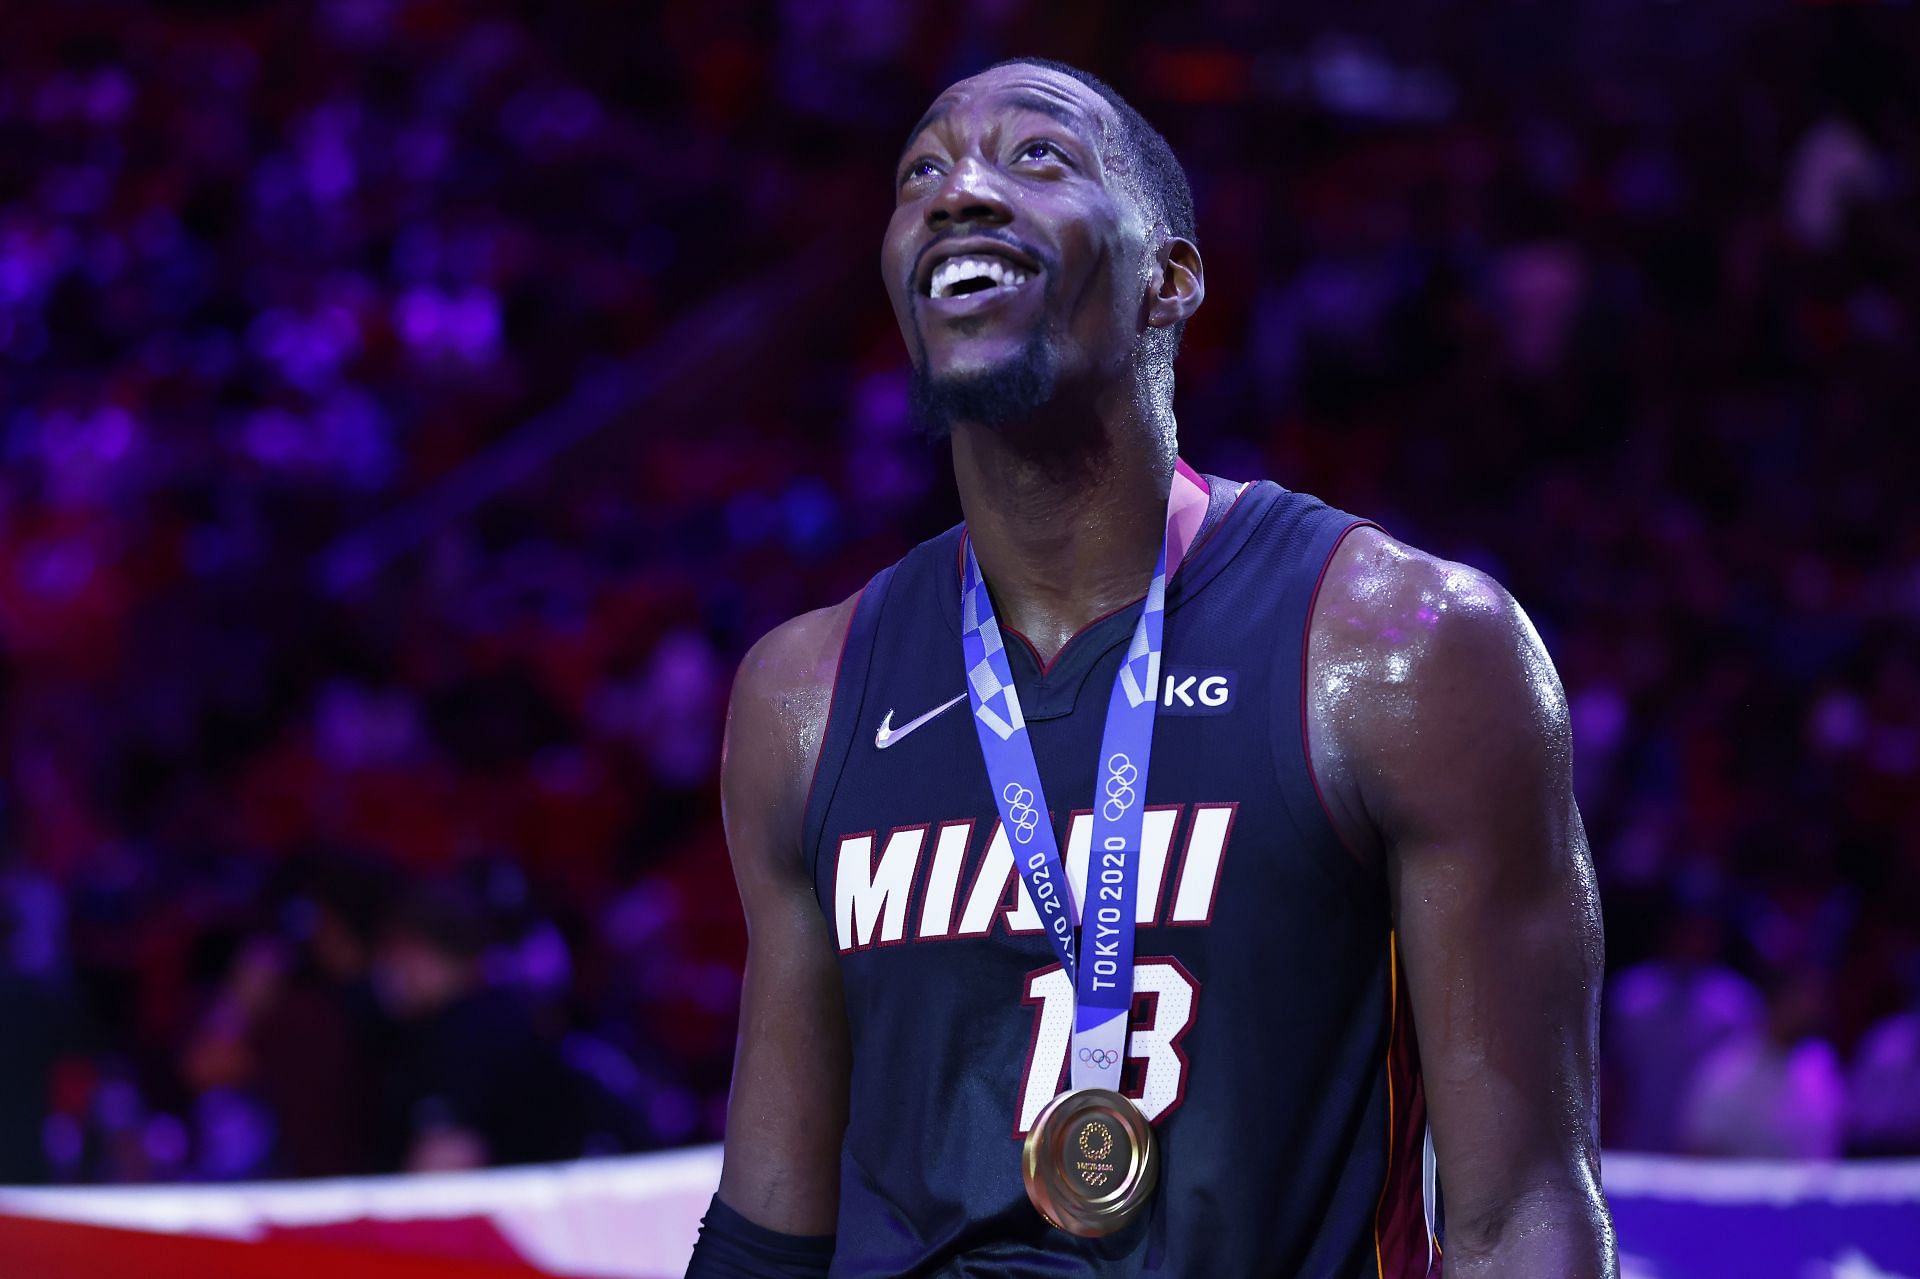 Bam Adebayo of the Miami Heat looks on as he is recognized for winning the gold medal at the 2020 Tokyo Olympics.